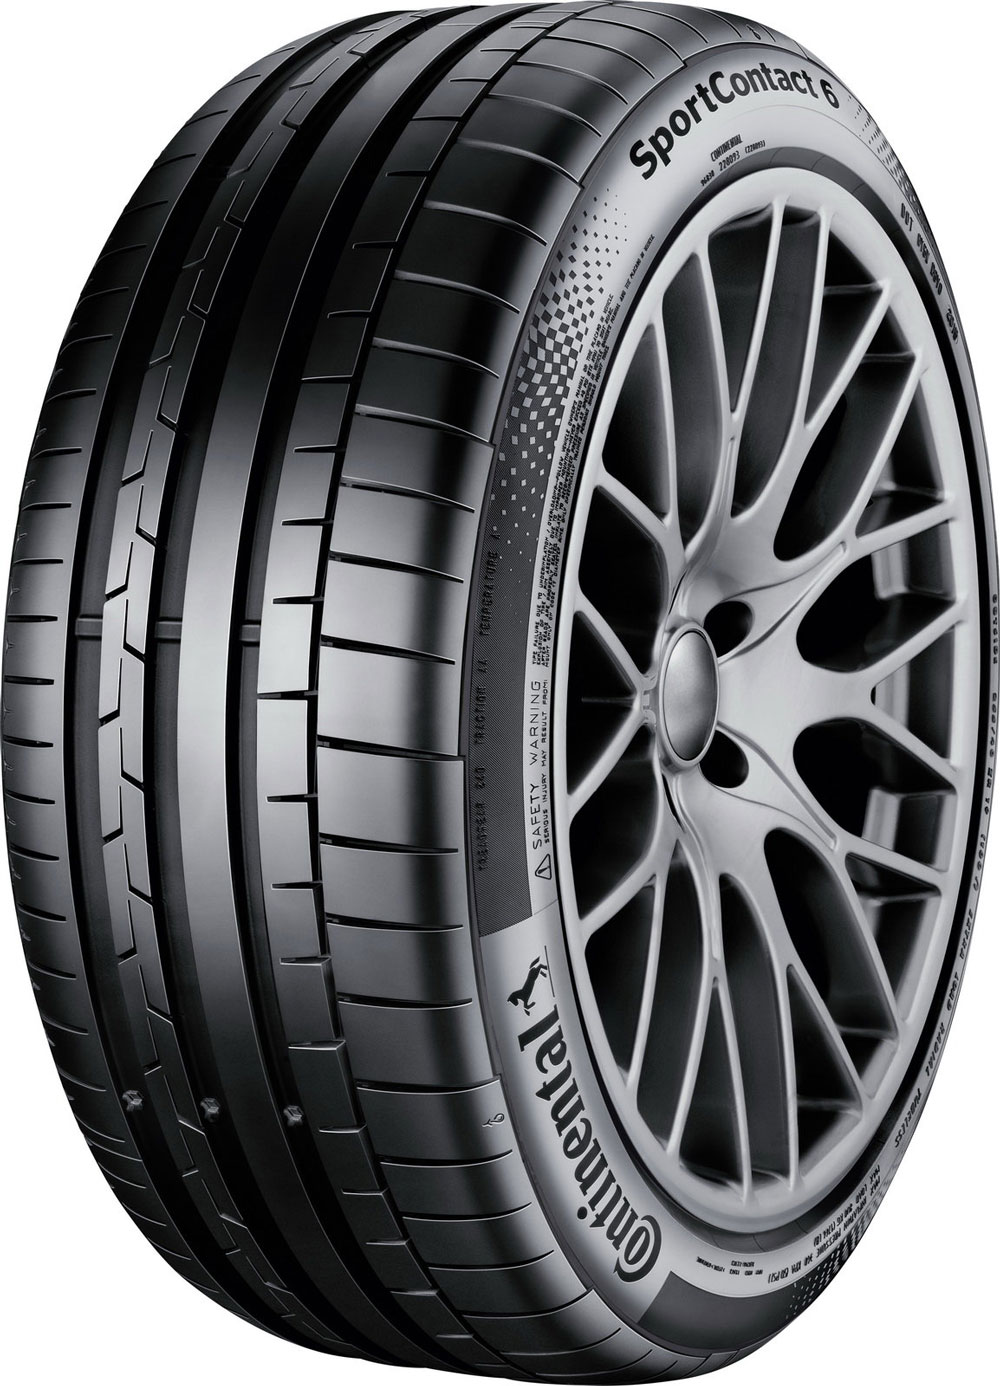 Автомобилни гуми CONTINENTAL SPORT CONTACT 6 FP 285/40 R20 104Y